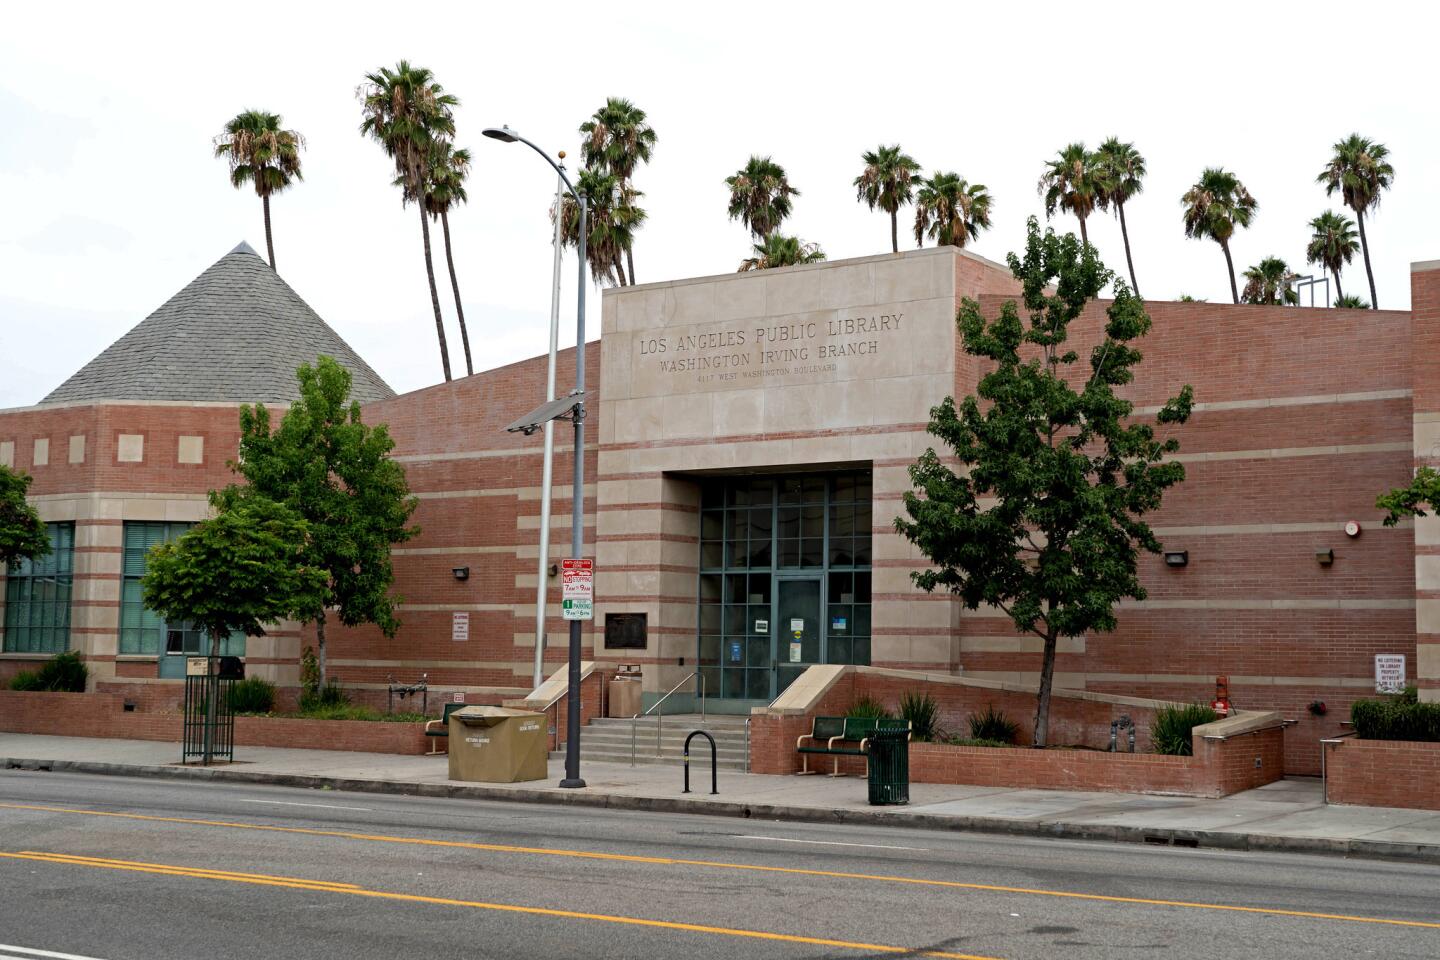 The Washington Irving branch of the L.A. Public Library.